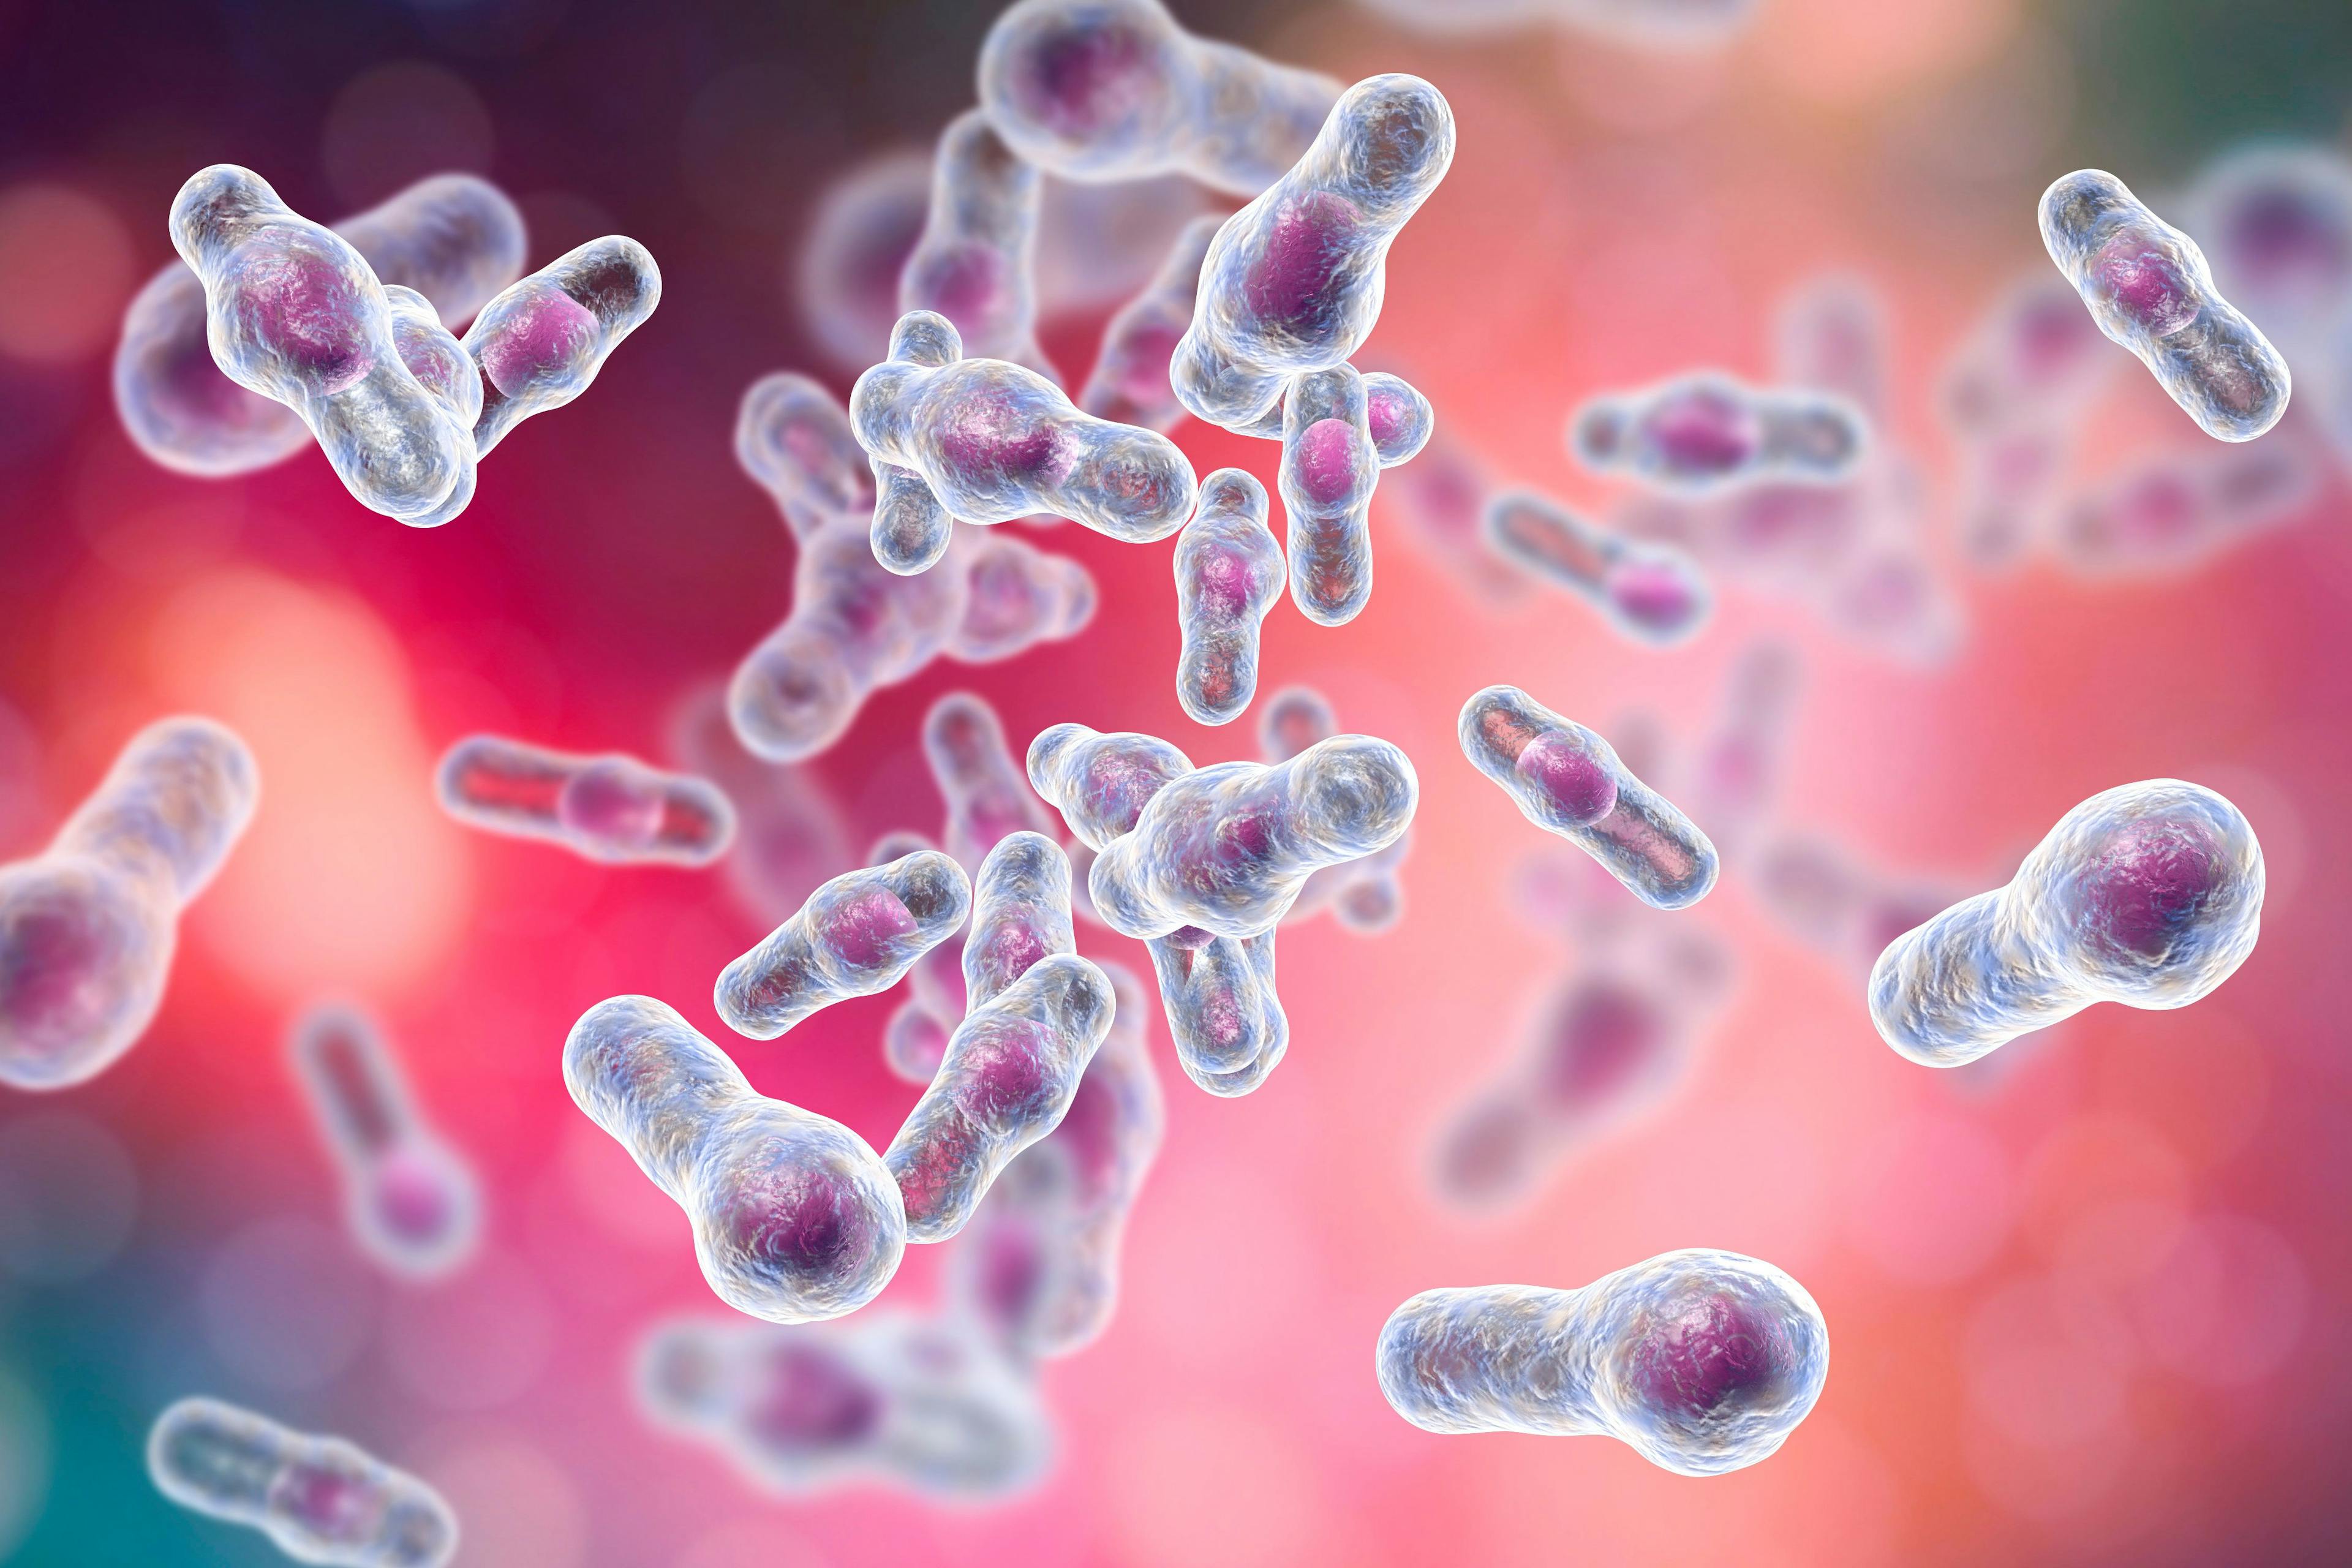 Approximately 35% of patients with clostridioides difficile infection (CDI) experience recurrence after the first episode, but the standard of care (SoC) antibiotic treatment may worsen risk of recurrence because it destroys the diversity of the gut microbiota. Image Credit: © Dr_Microbe - stock.adobe.com